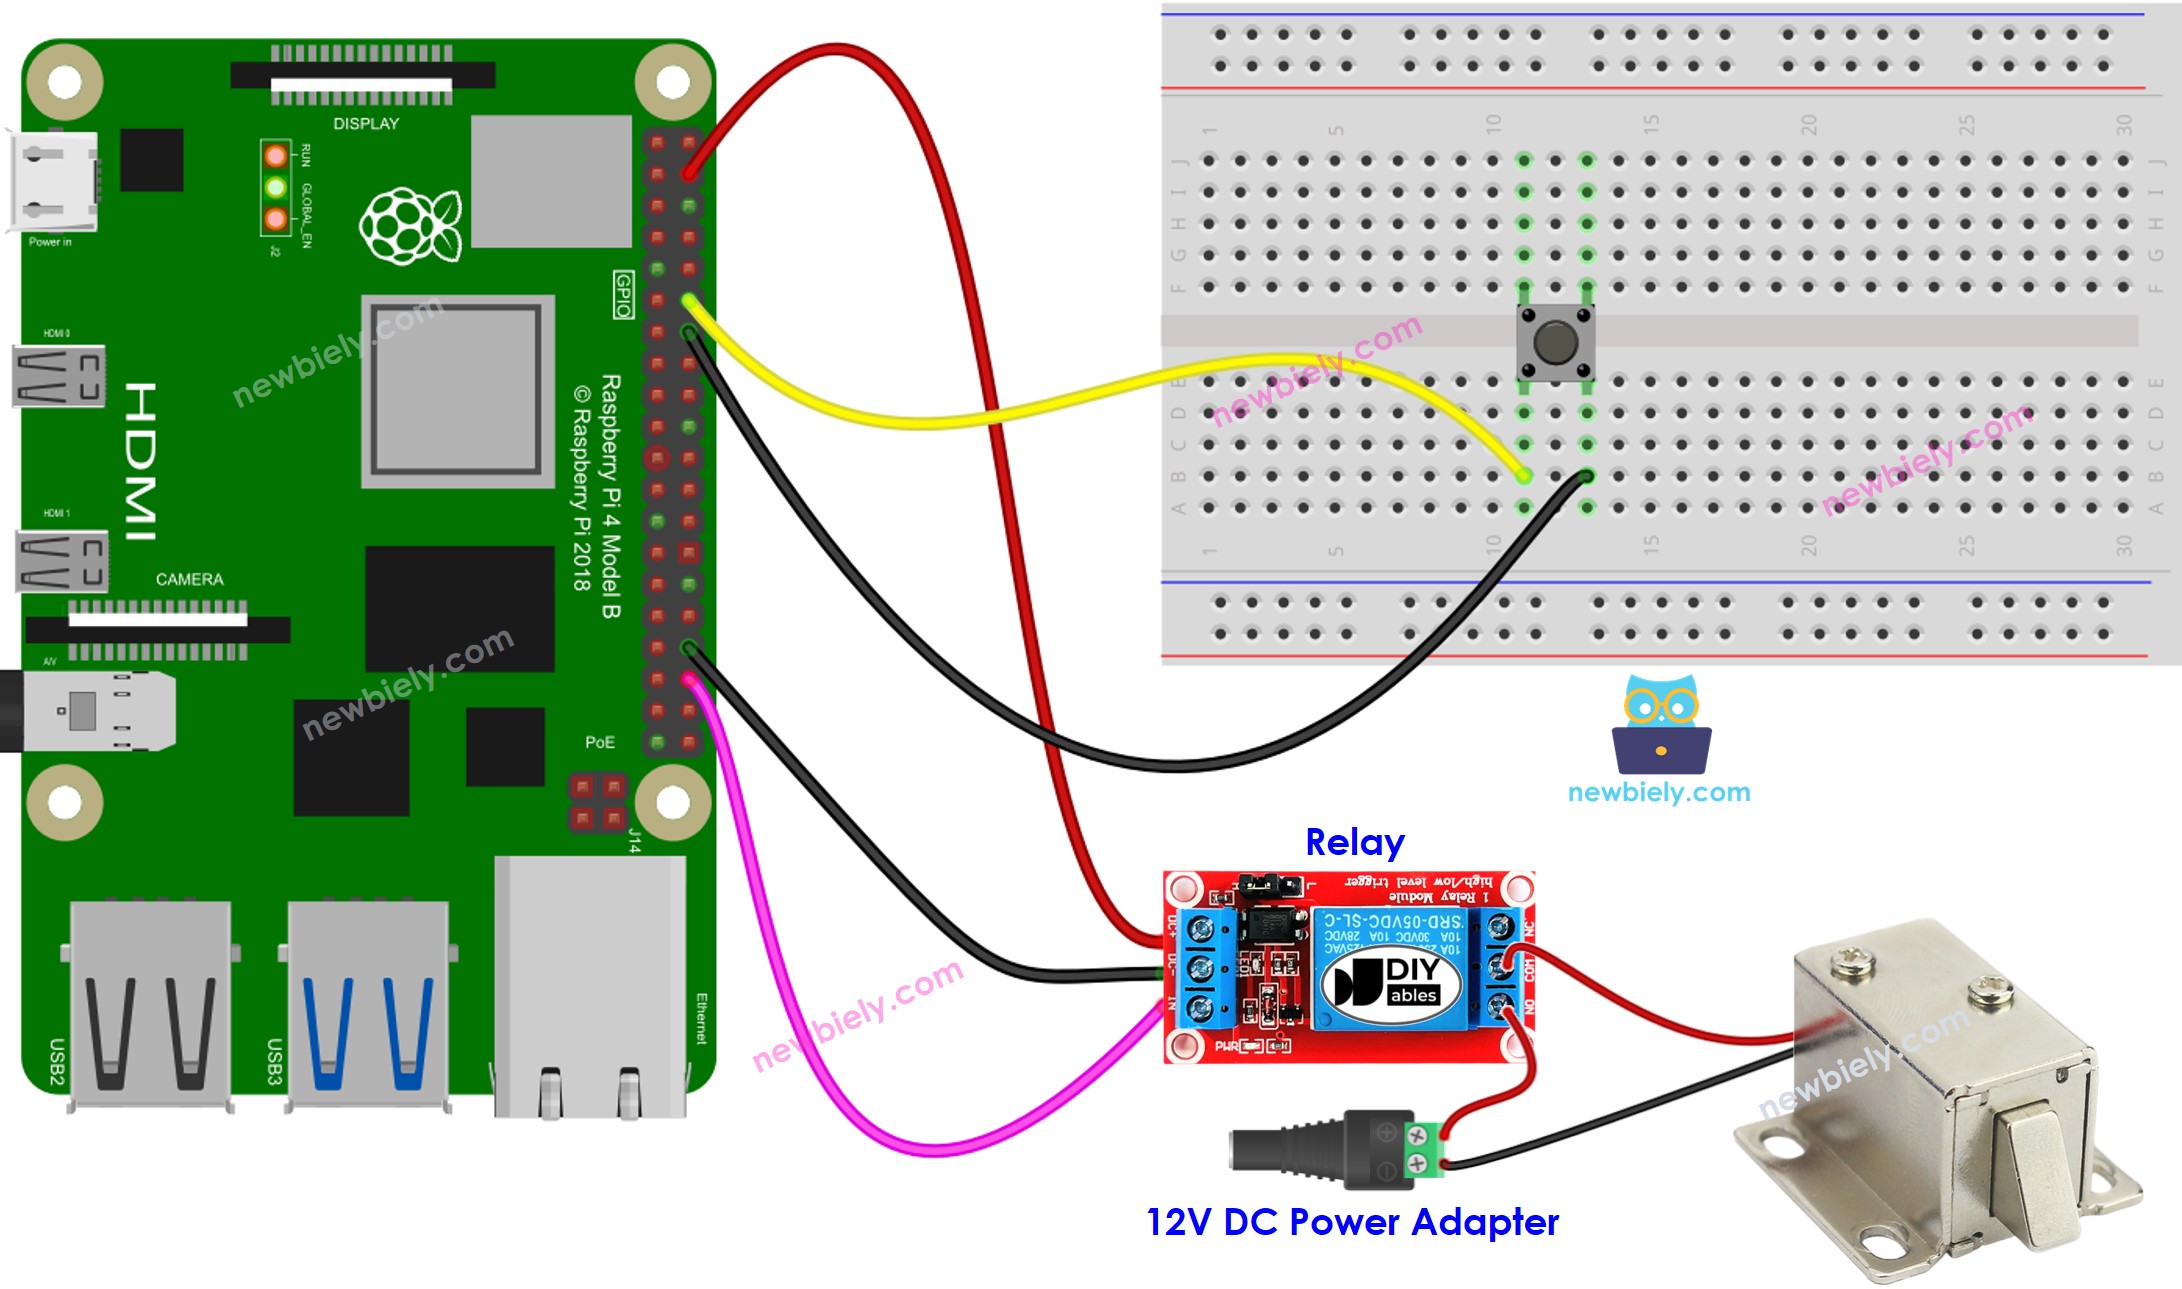 The wiring diagram between Raspberry Pi and button solenoid lock